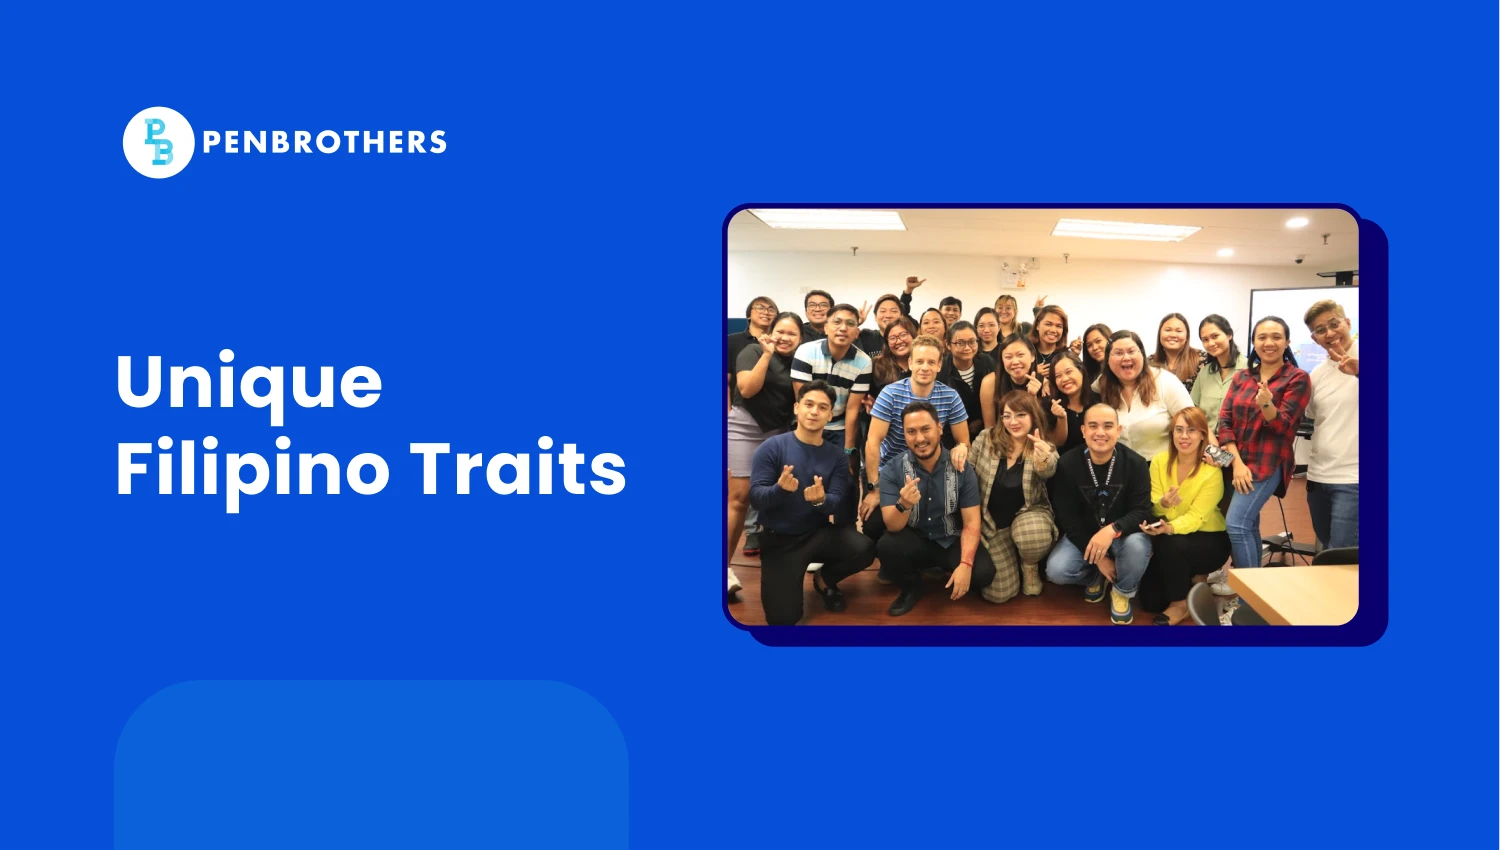 Top 6 Cultural Traits and Values That Make Filipinos Ideal Remote Workers